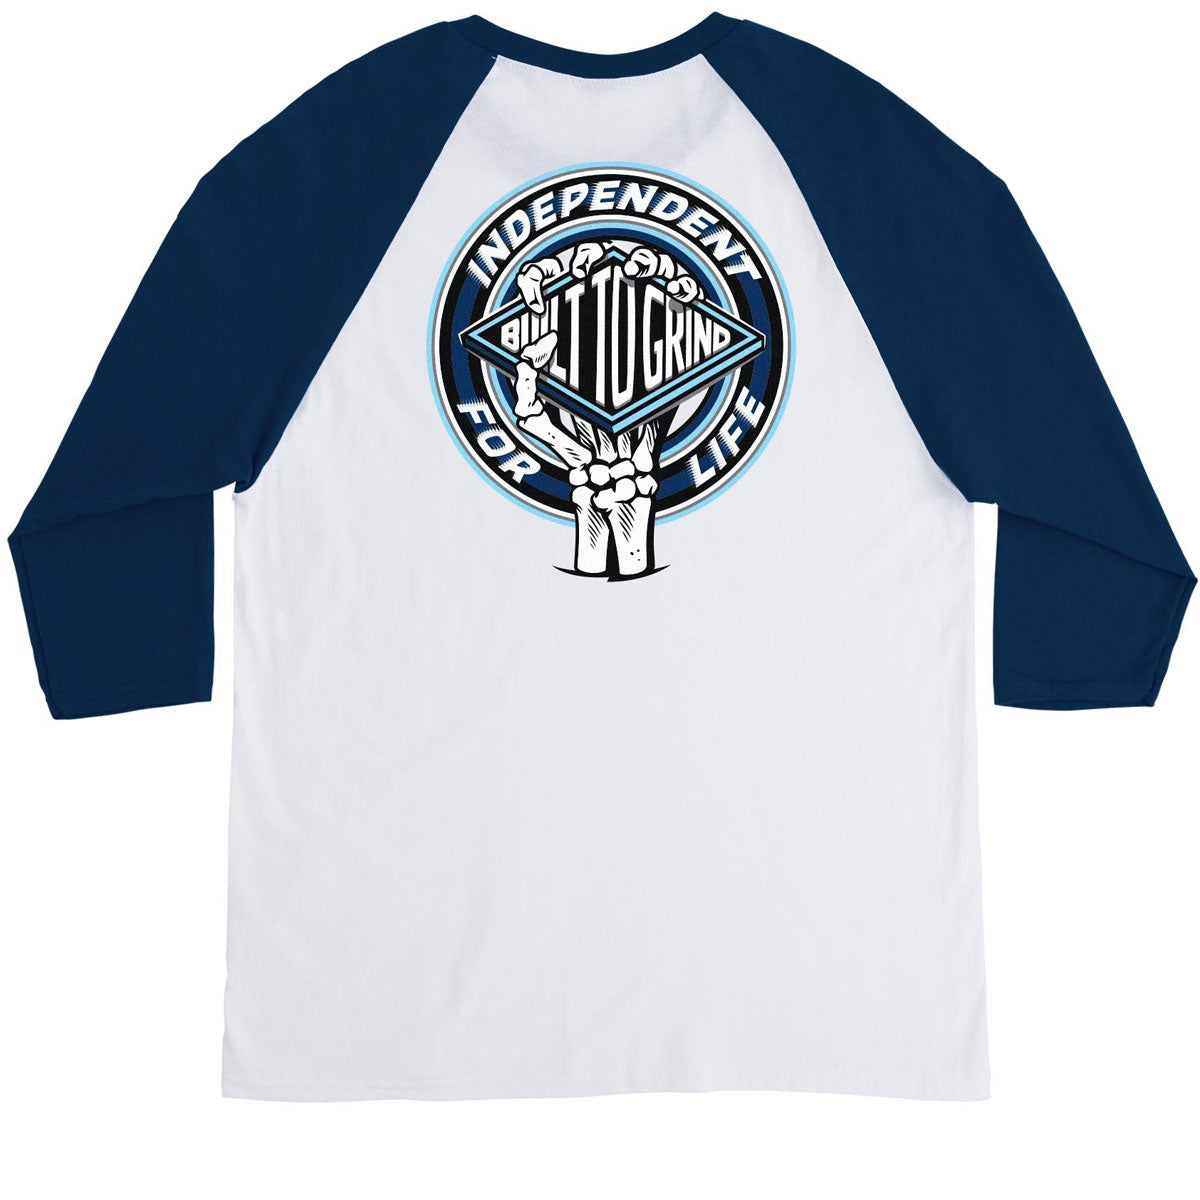 Independent For Life Clutch 3/4 Sleeve T-Shirt - White/Navy image 1